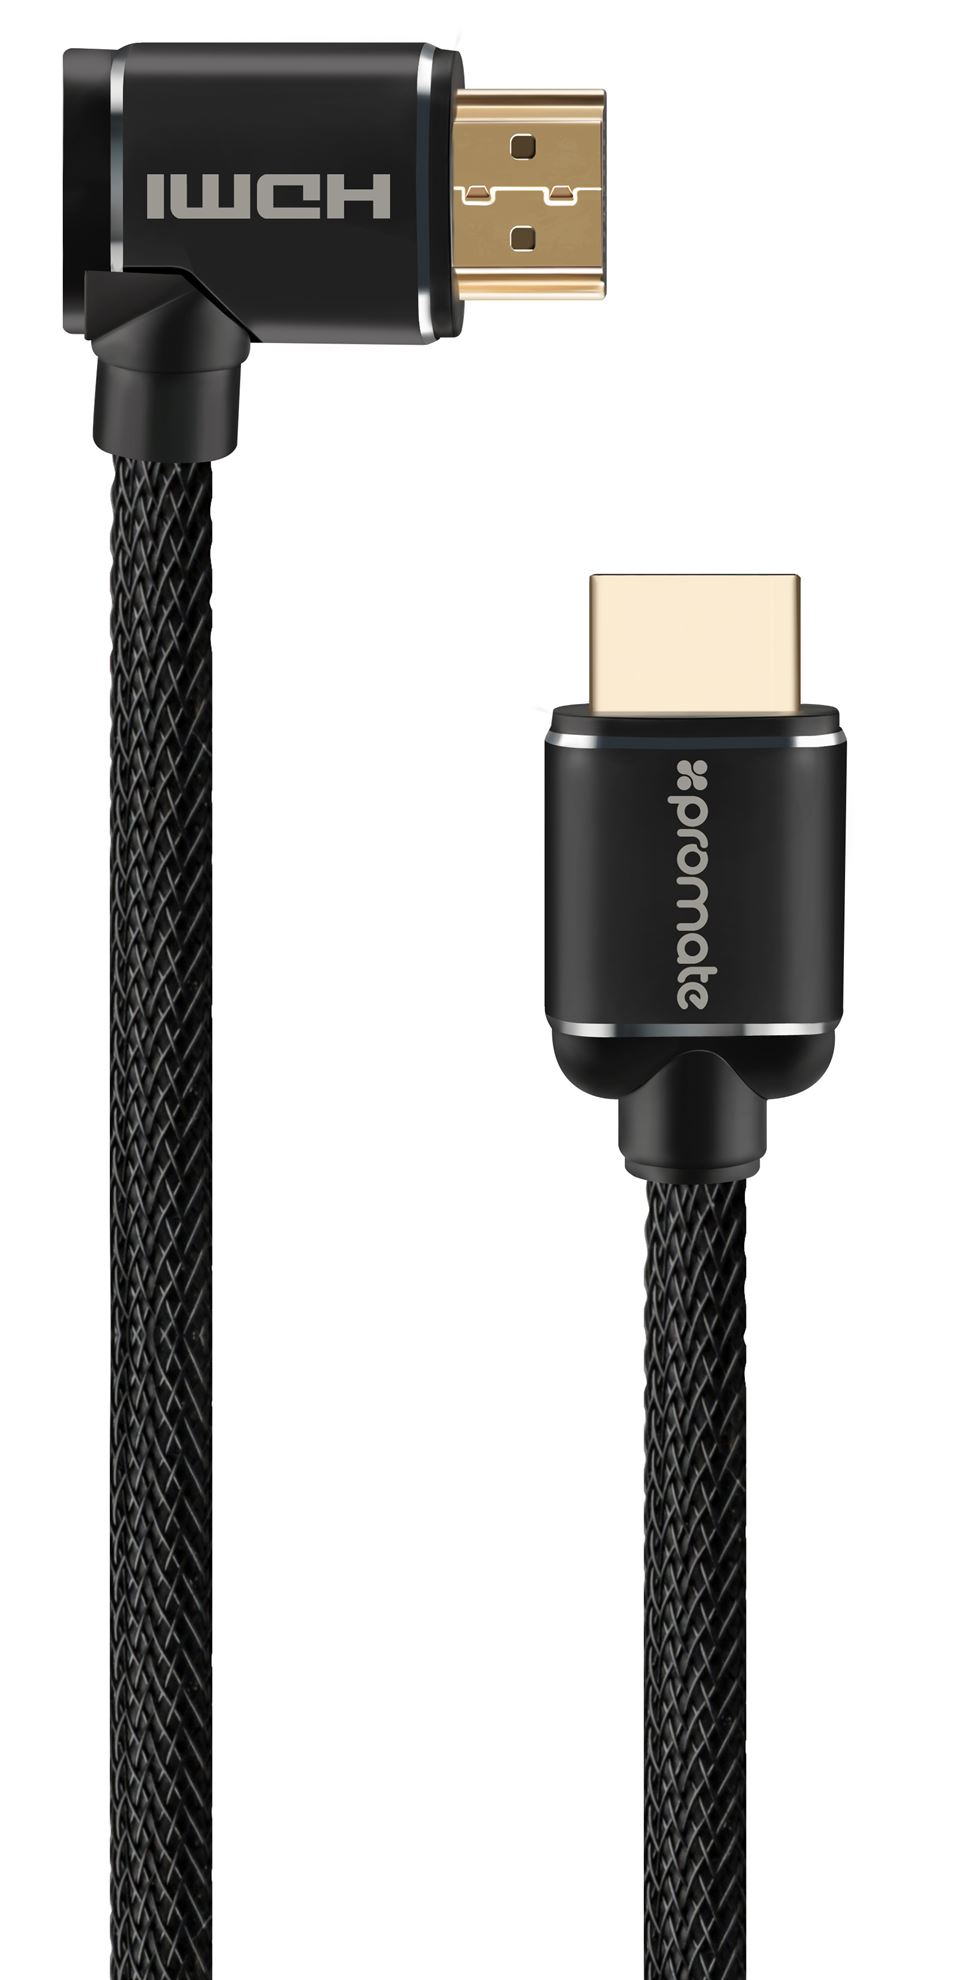 PROMATE_3m_4K_HDMI_right_angle_Cable._24K_Gold_plated._High-Speed_Ethernet._3D_support._Mesh_Braided_cable._Long_bend_lifespan._Max_Res:_4K@60Hz_(4096X2160)_July_Sale_-_20%_OFF 1678